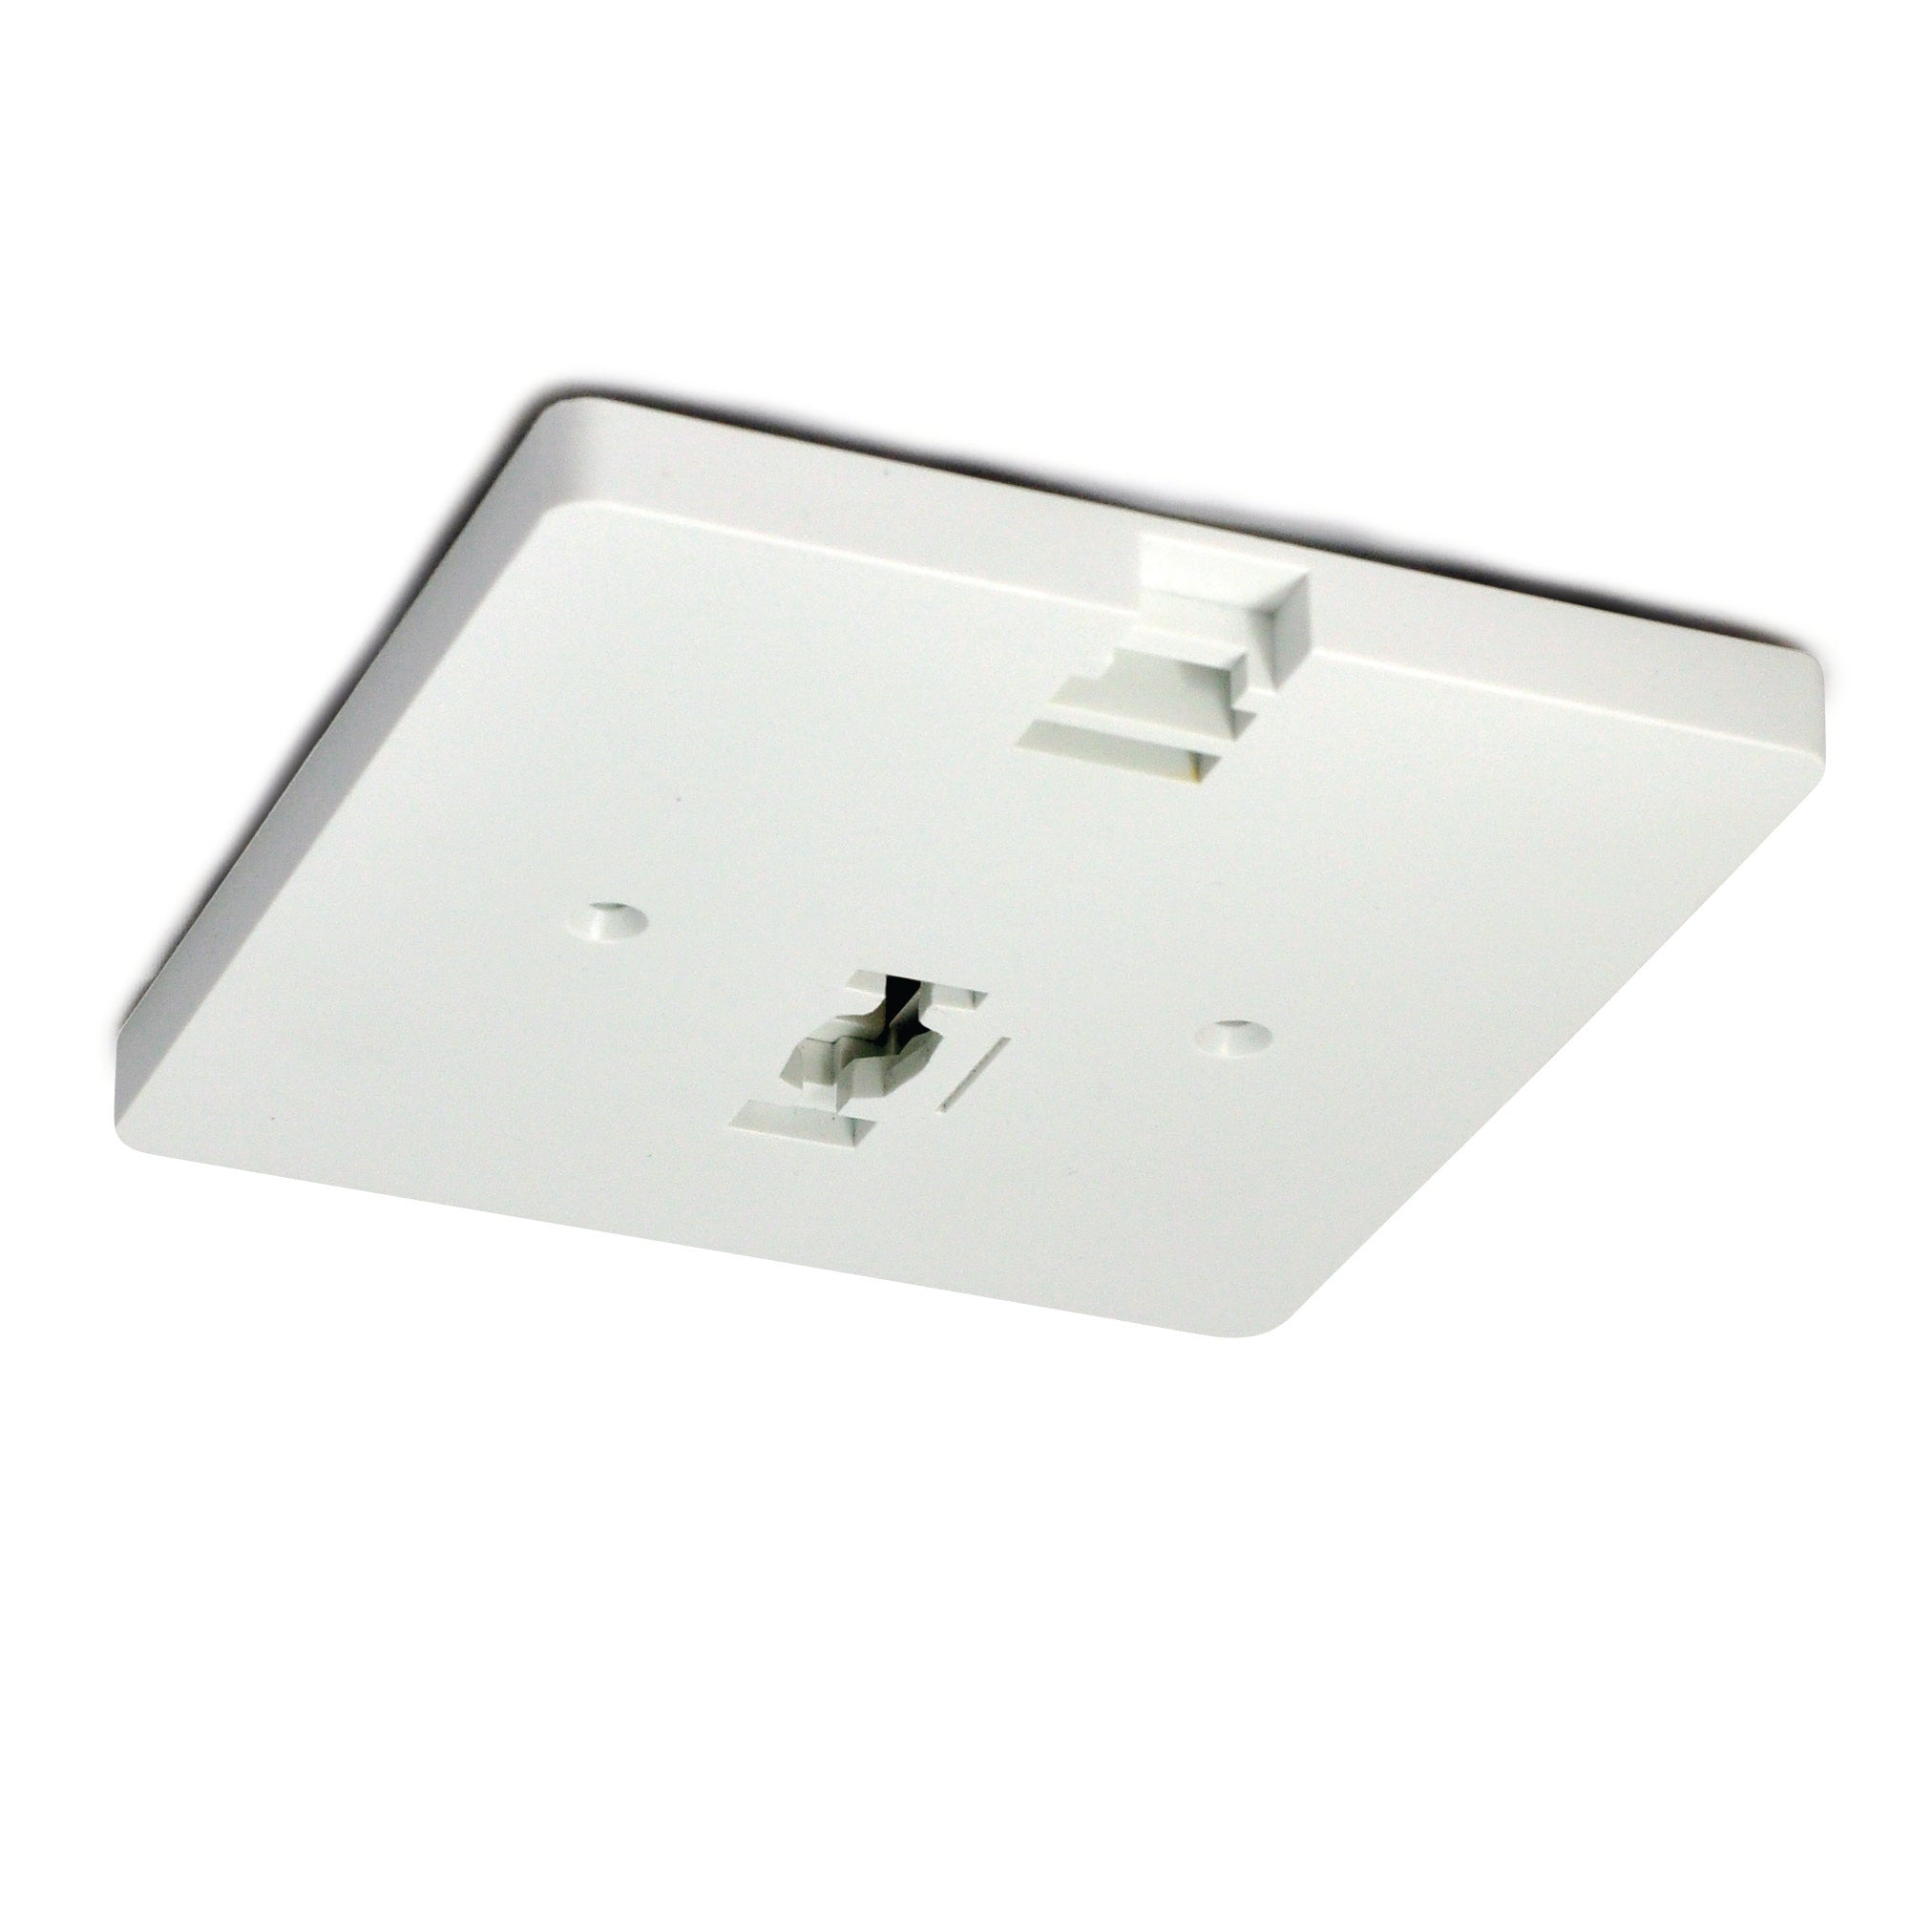 Nora Lighting NT-337W - Track - Monopoint Canopy Feed for Low Voltage Track Head, White